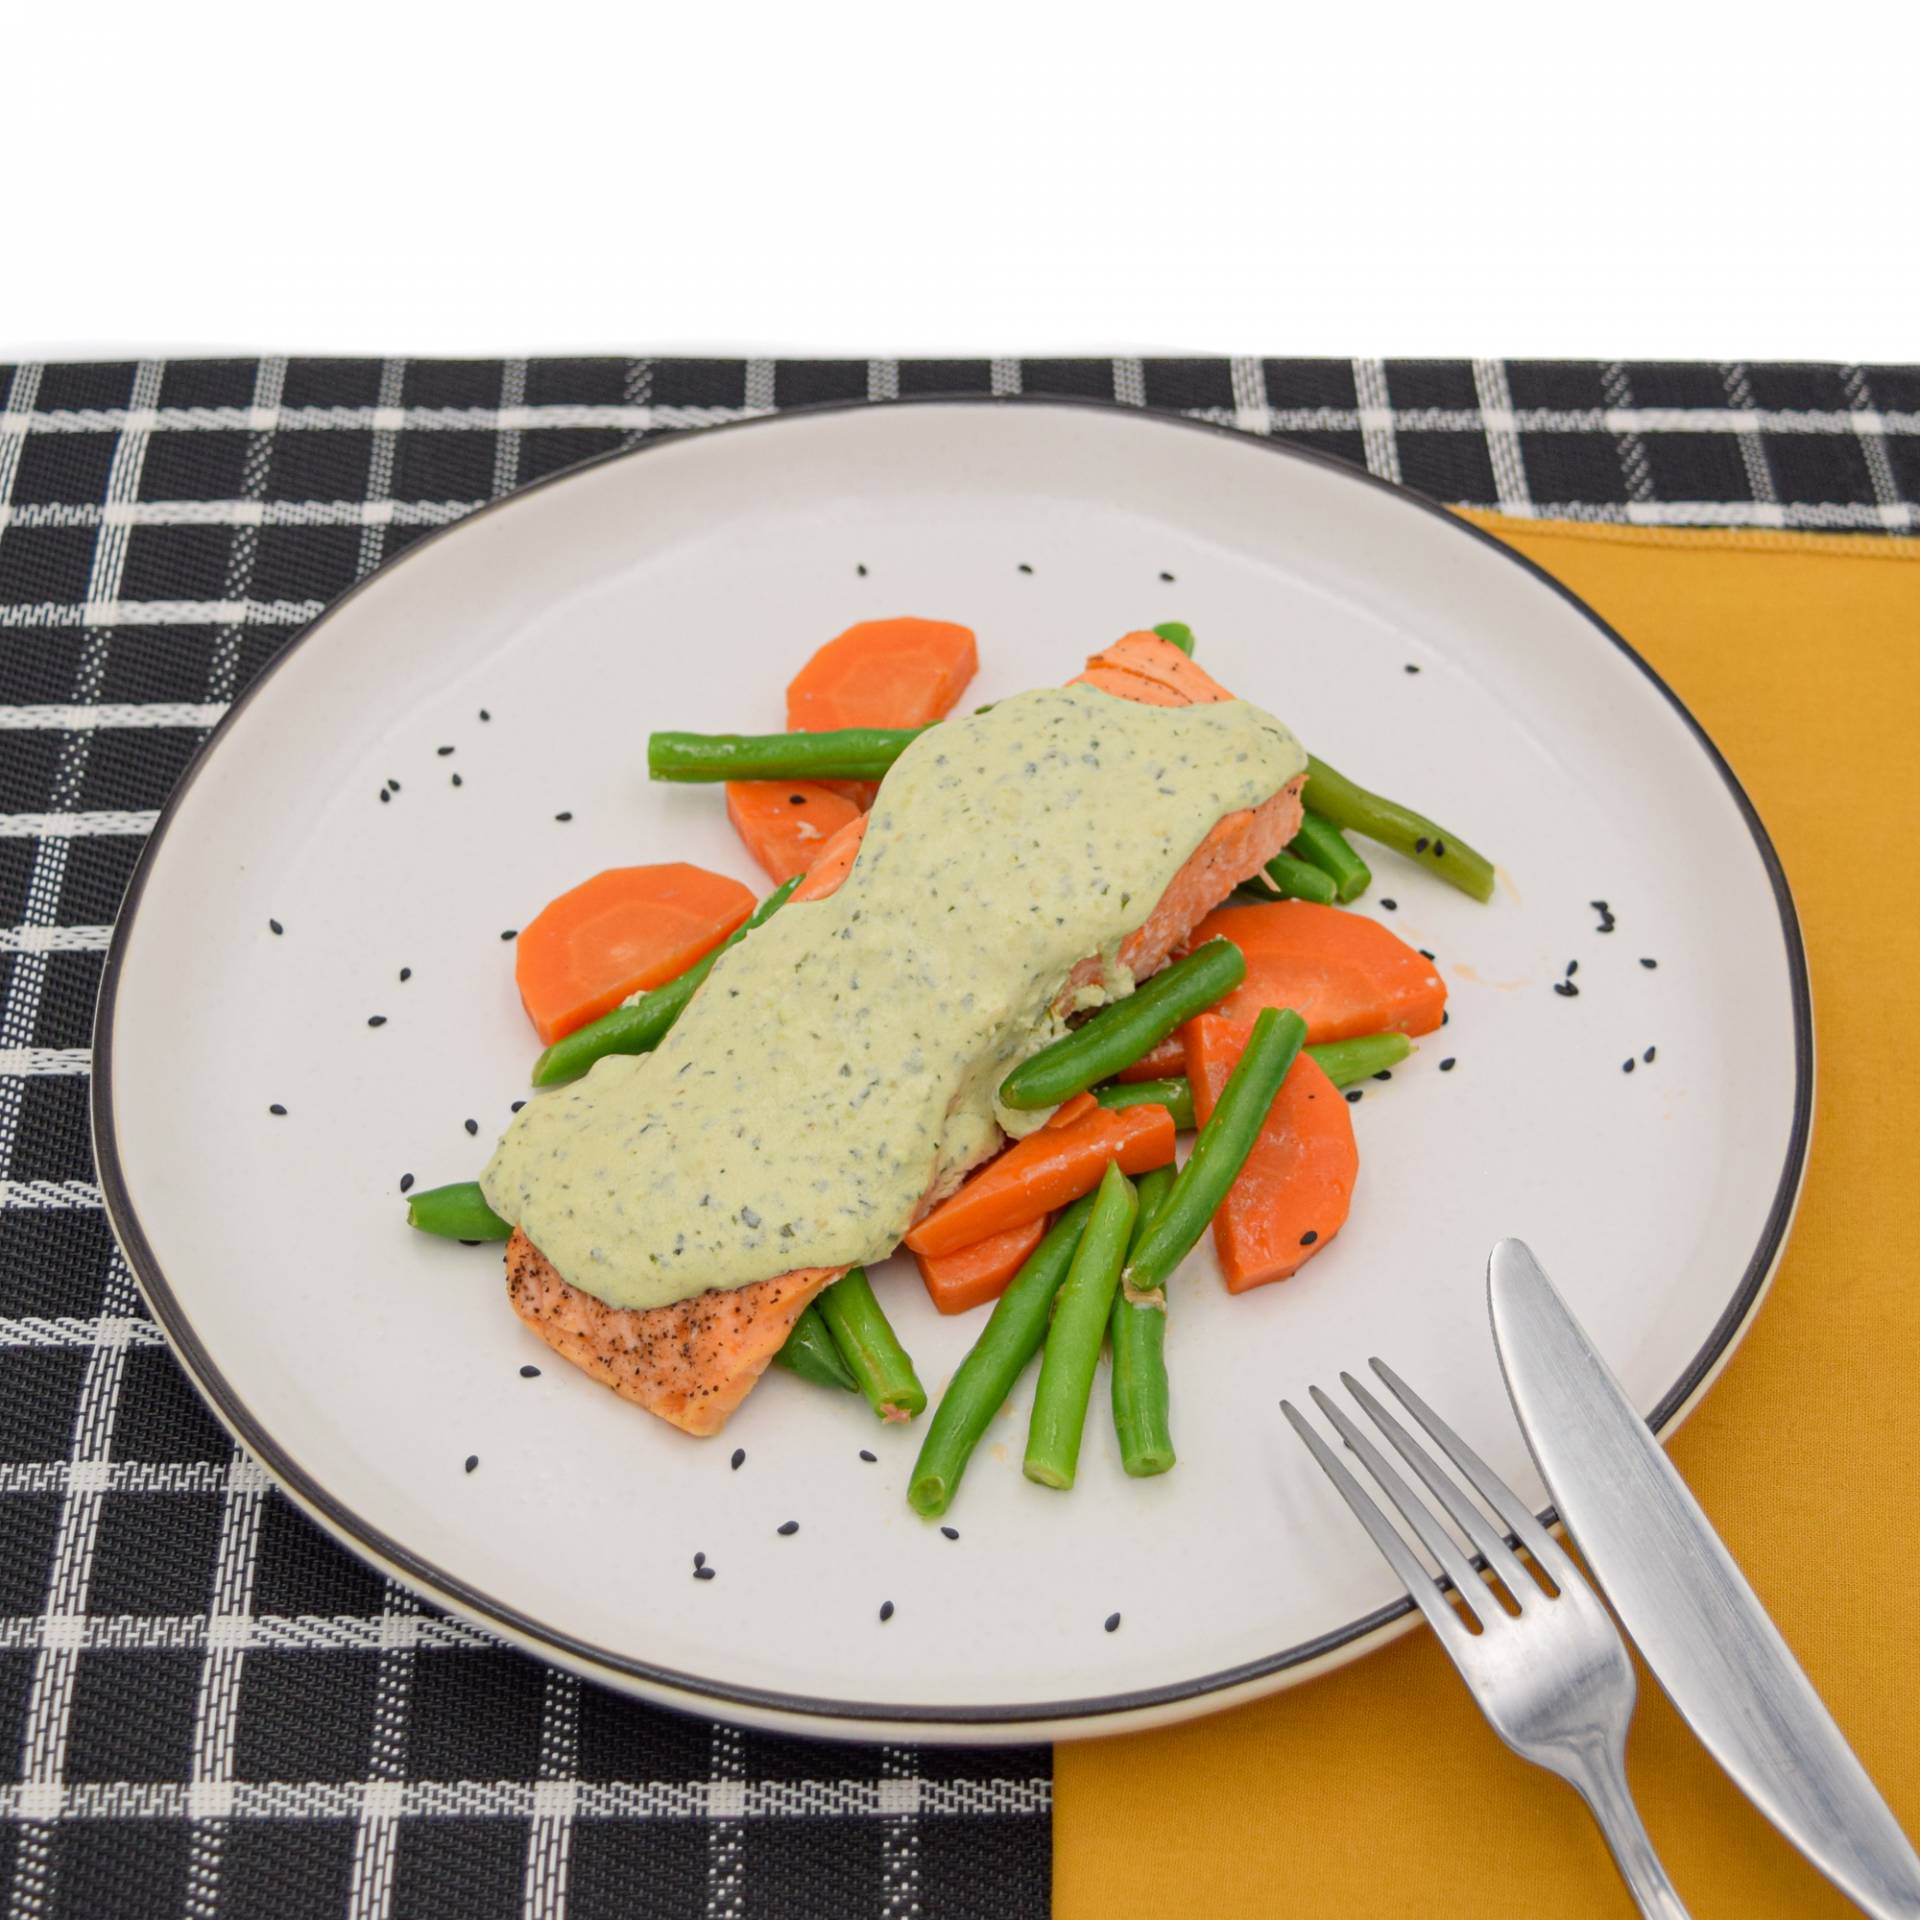 Baked salmon with creamy pesto and mixed vegetables